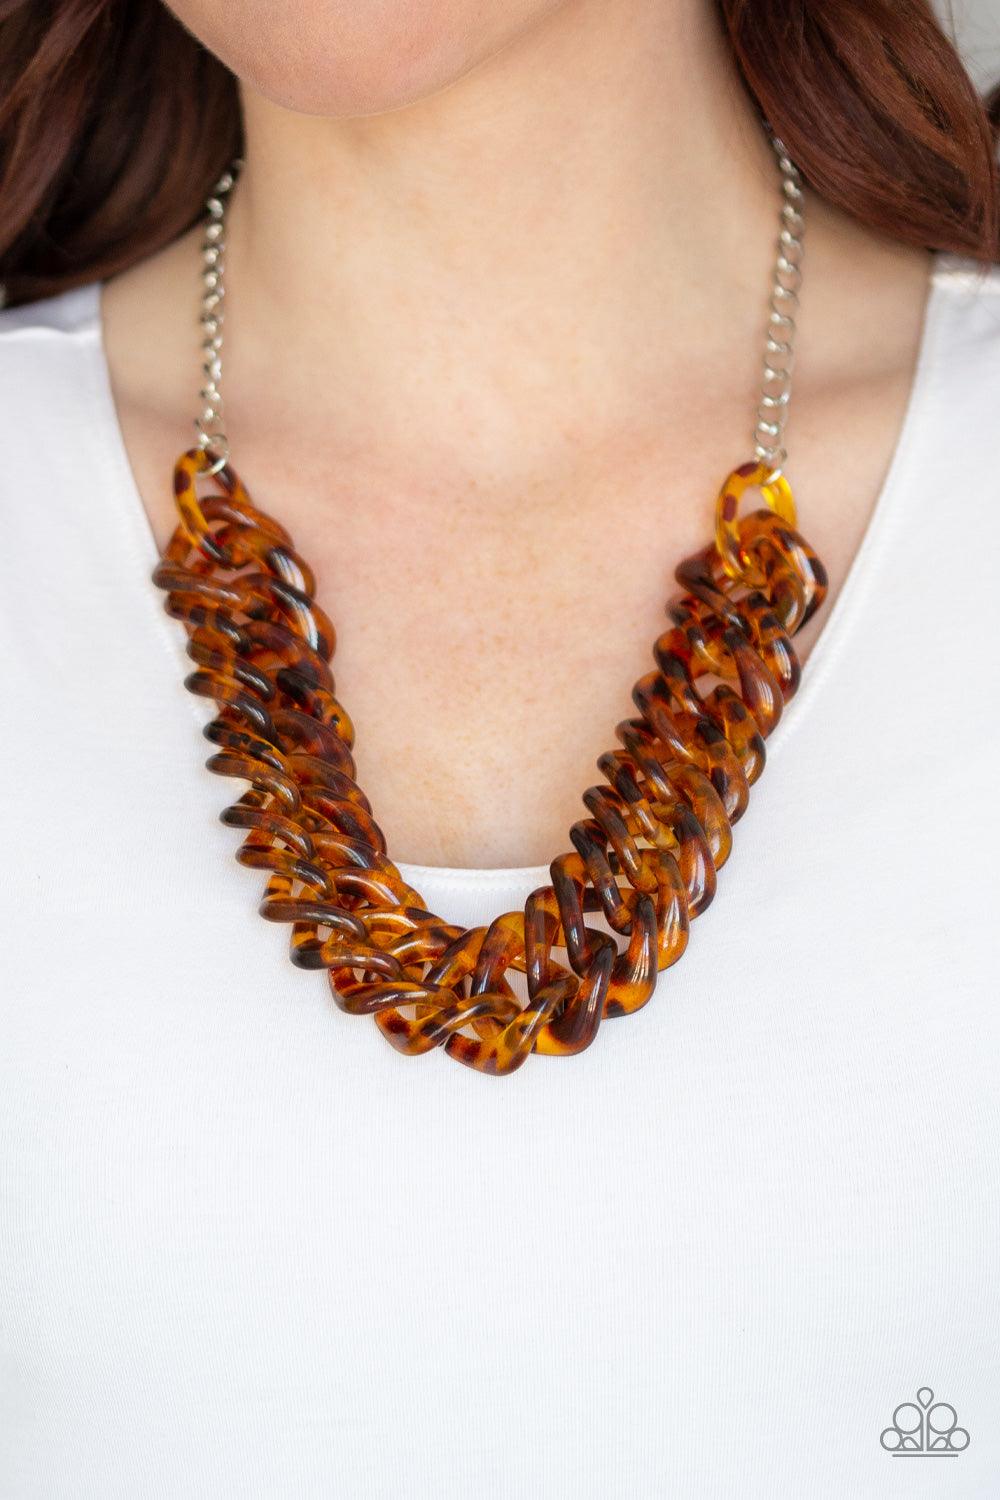 Paparazzi Accessories Comin In HAUTE - Brown Featuring a tortoise shell finish, square brown acrylic links subtlety twist as they link below the collar for a colorful statement-making look. Features an adjustable clasp closure. Sold as one individual neck